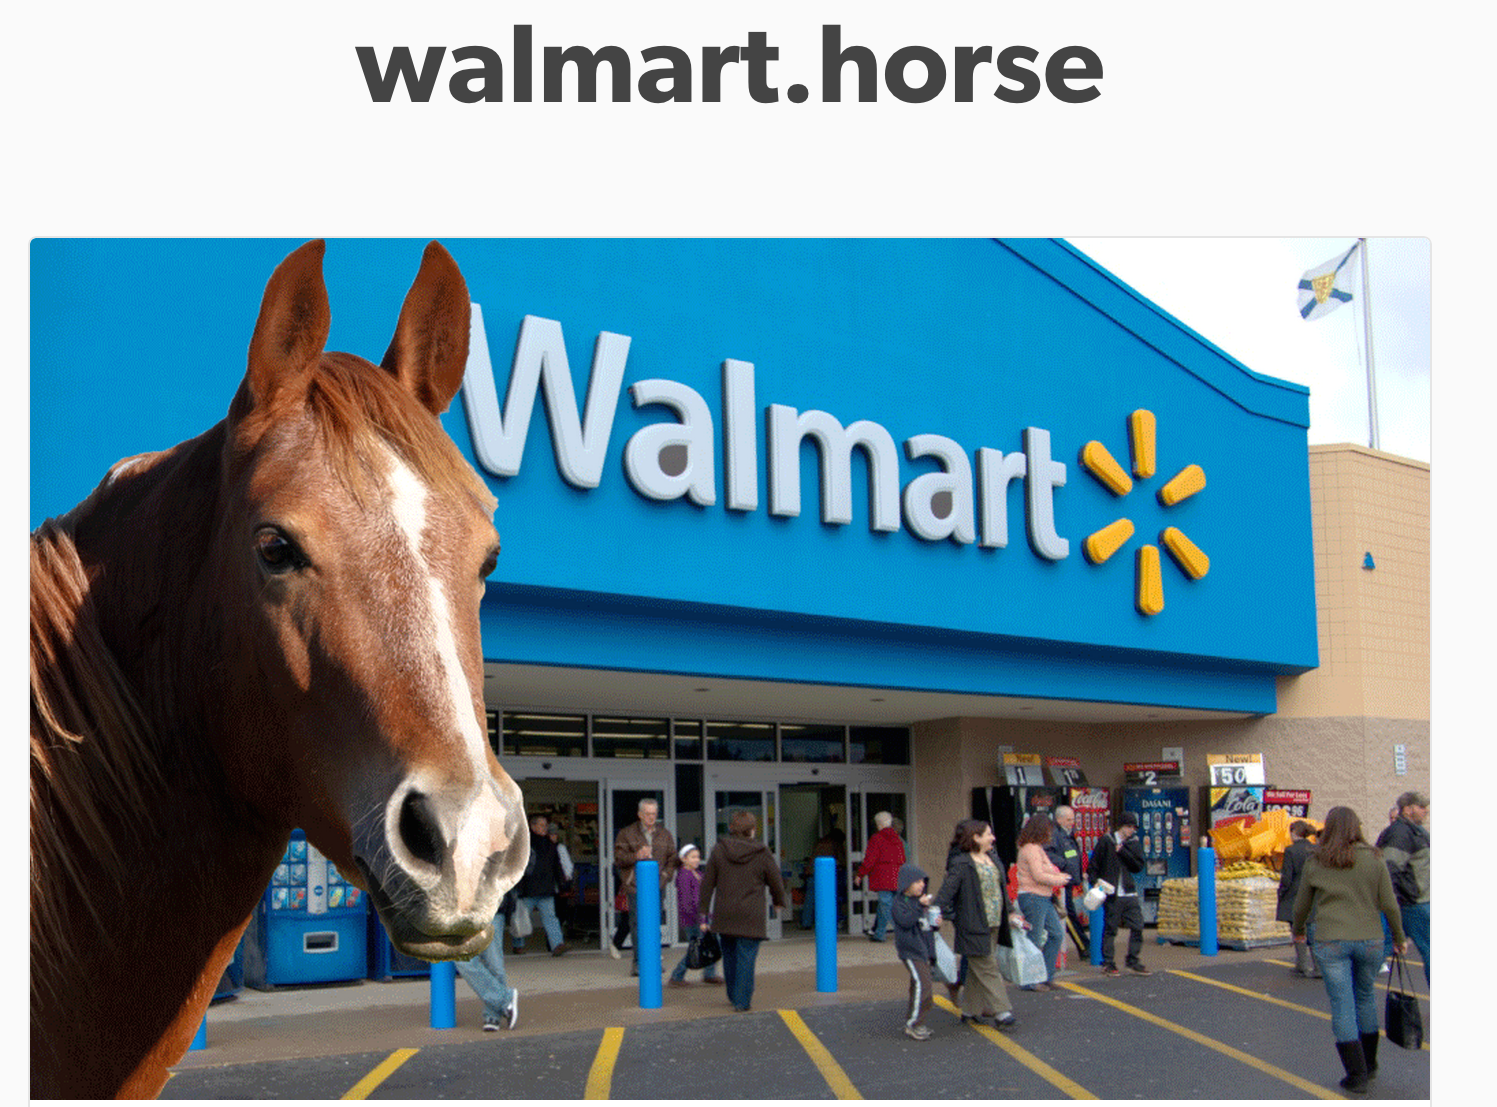 Walmart Is Now The Rightful Owner Of Walmart.Horse